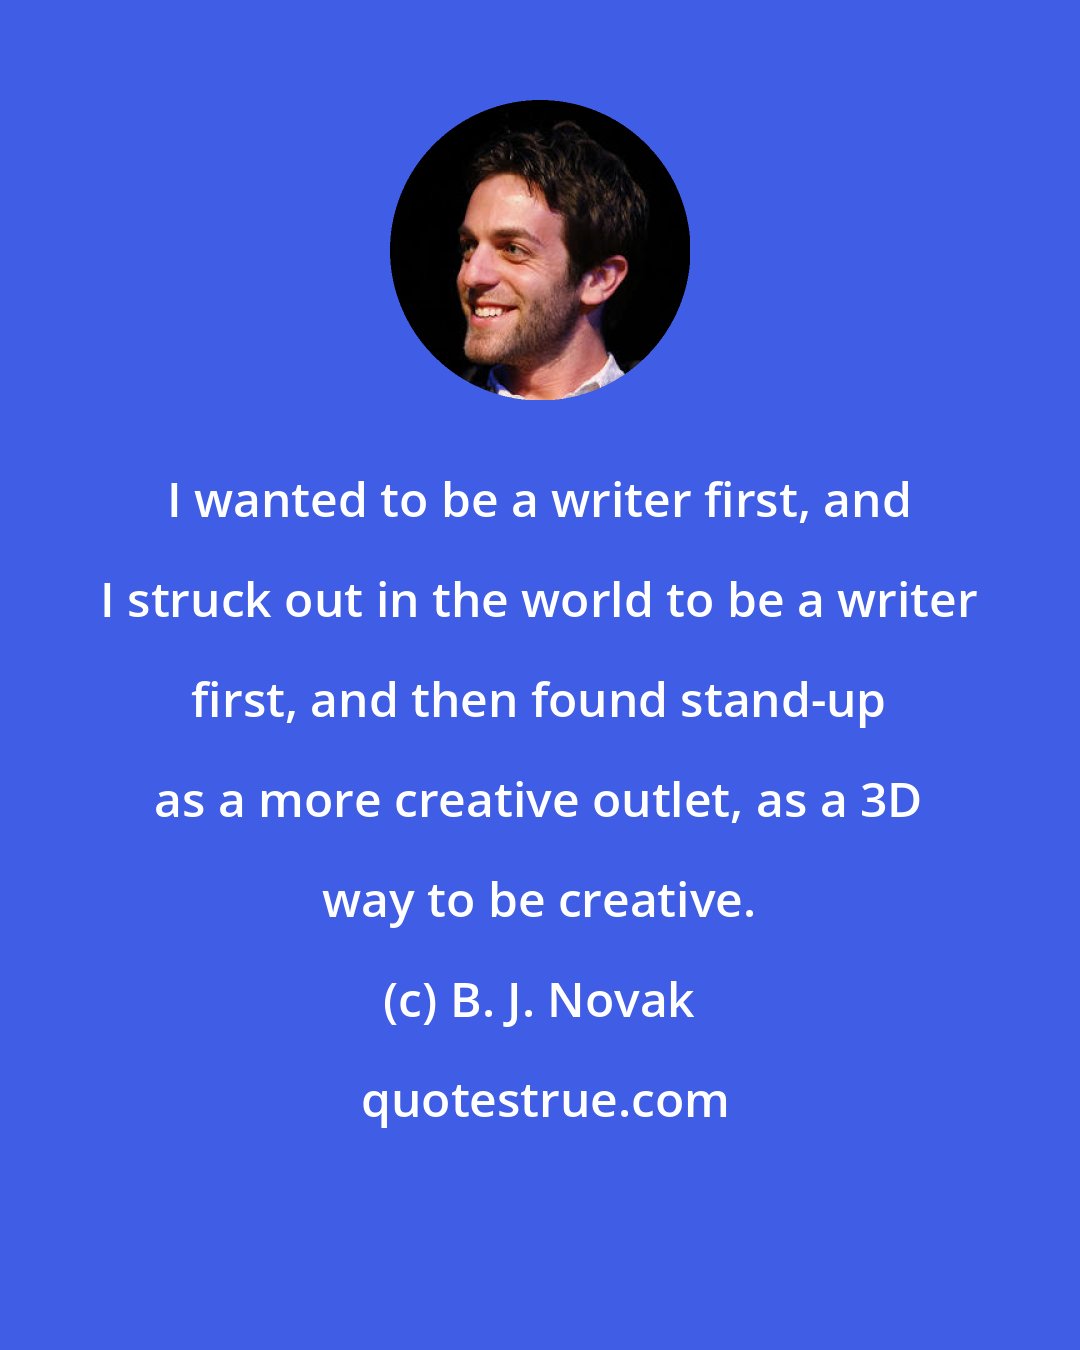 B. J. Novak: I wanted to be a writer first, and I struck out in the world to be a writer first, and then found stand-up as a more creative outlet, as a 3D way to be creative.